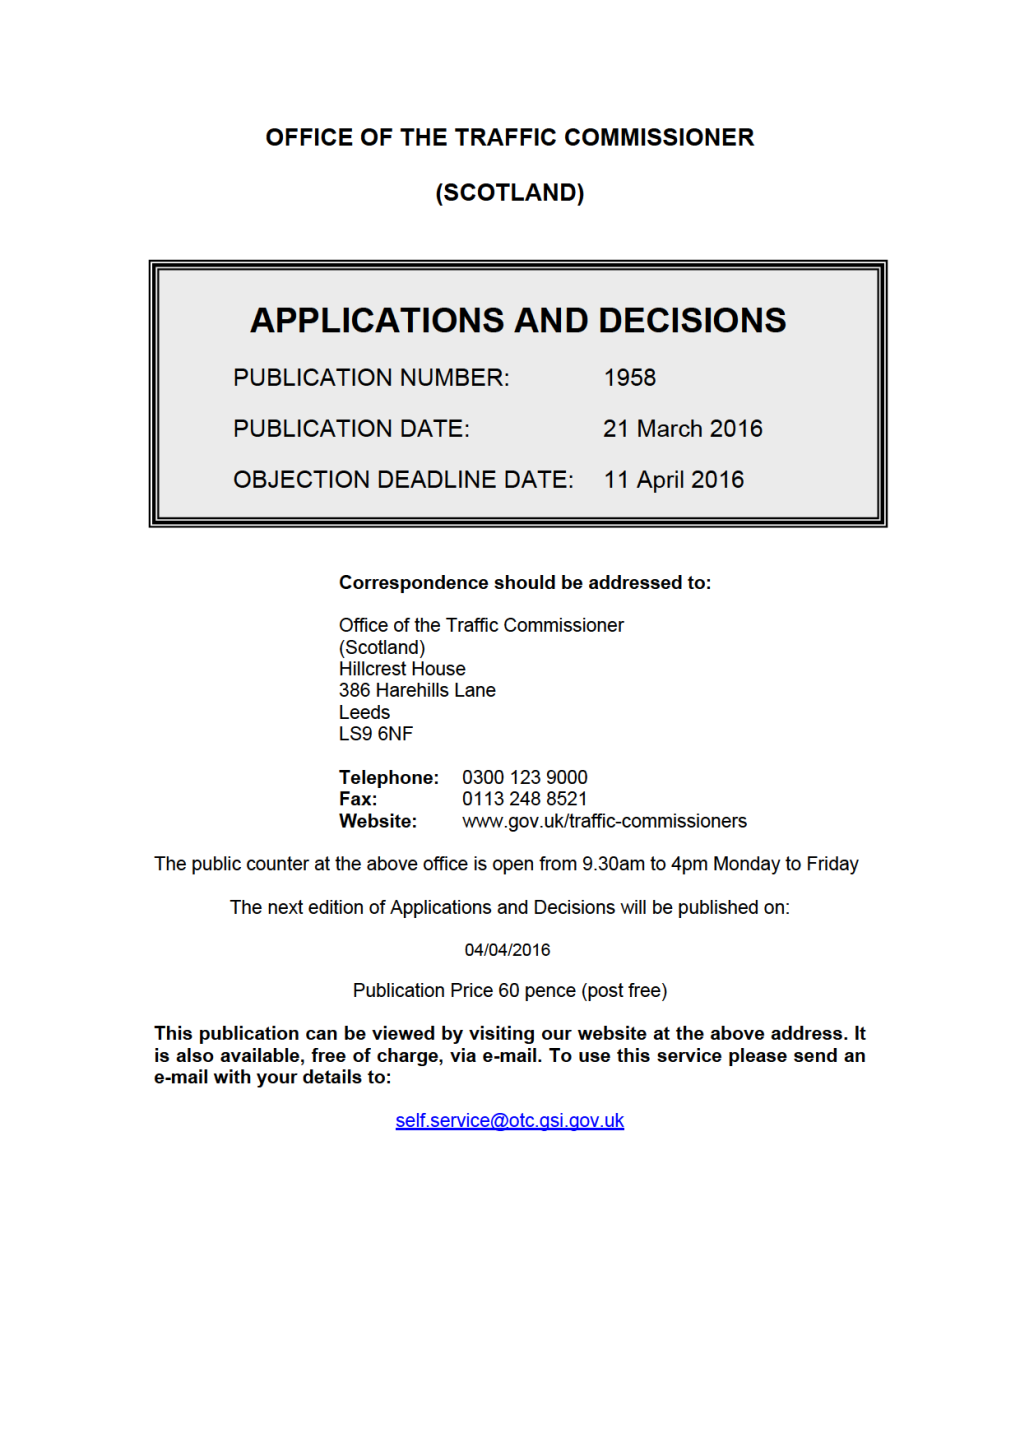 APPLICATIONS and DECISIONS 21 March 2016